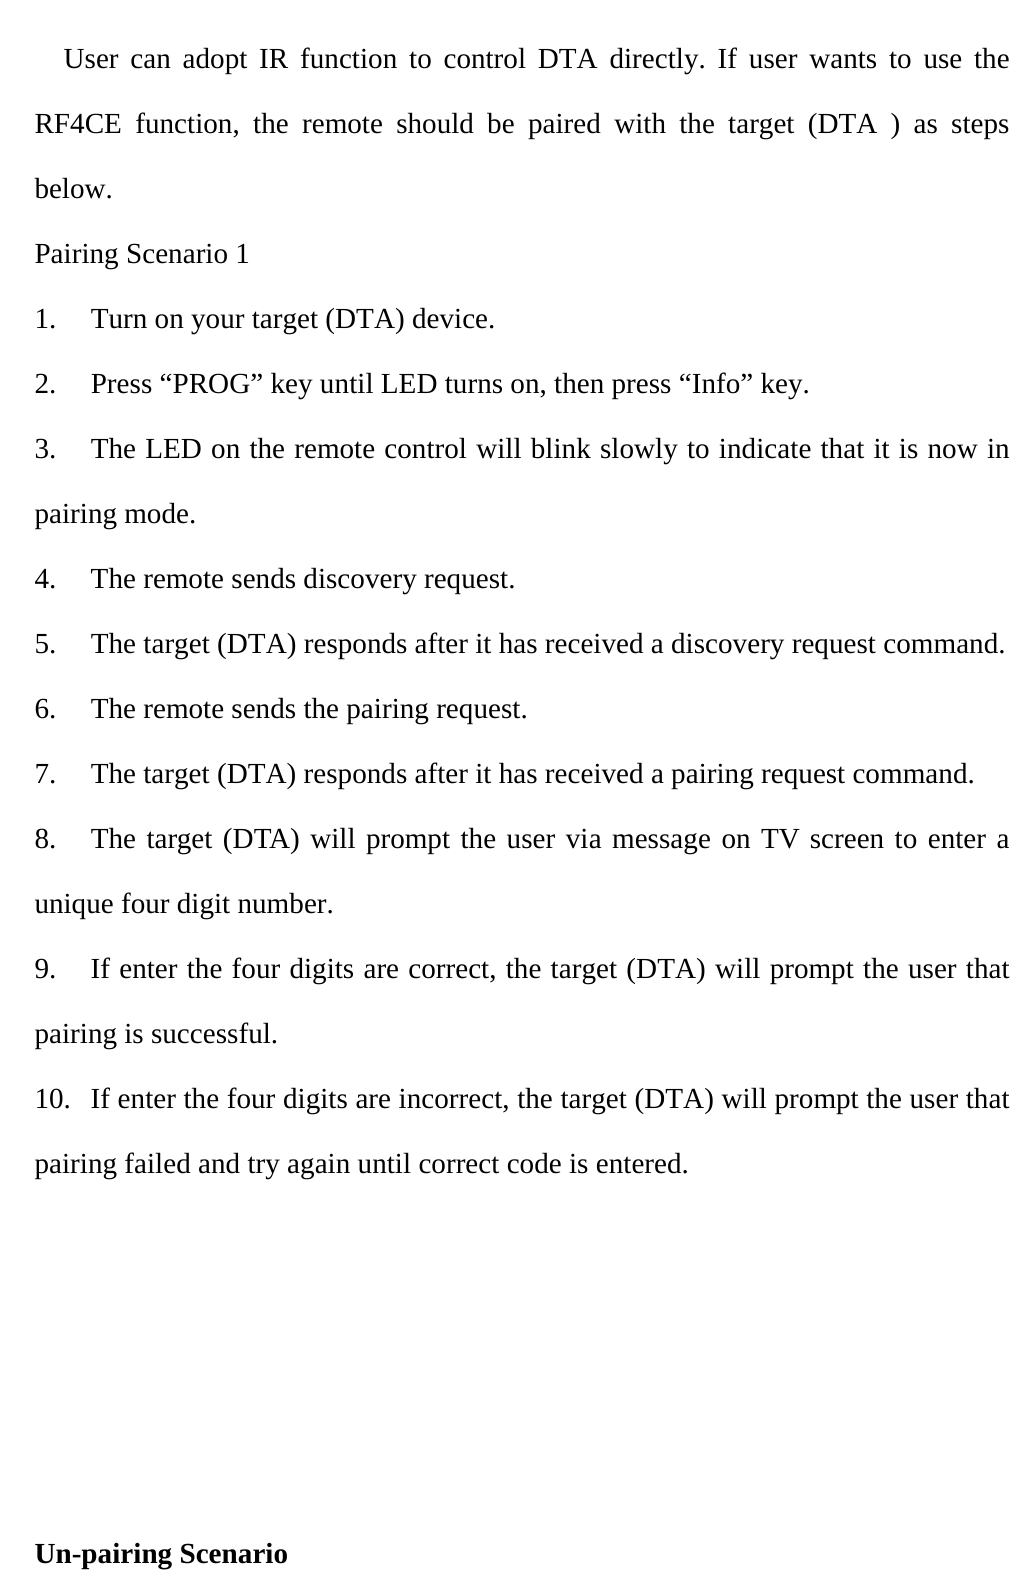         User can adopt IR function to control DTA directly. If user wants to use the RF4CE function, the remote should be paired with the target (DTA ) as steps below. Pairing Scenario 1 1.  Turn on your target (DTA) device. 2.  Press “PROG” key until LED turns on, then press “Info” key. 3.  The LED on the remote control will blink slowly to indicate that it is now in pairing mode. 4.  The remote sends discovery request. 5.  The target (DTA) responds after it has received a discovery request command. 6.  The remote sends the pairing request. 7.  The target (DTA) responds after it has received a pairing request command. 8.  The target (DTA) will prompt the user via message on TV screen to enter a unique four digit number. 9.  If enter the four digits are correct, the target (DTA) will prompt the user that   pairing is successful. 10.  If enter the four digits are incorrect, the target (DTA) will prompt the user that pairing failed and try again until correct code is entered.      Un-pairing Scenario 